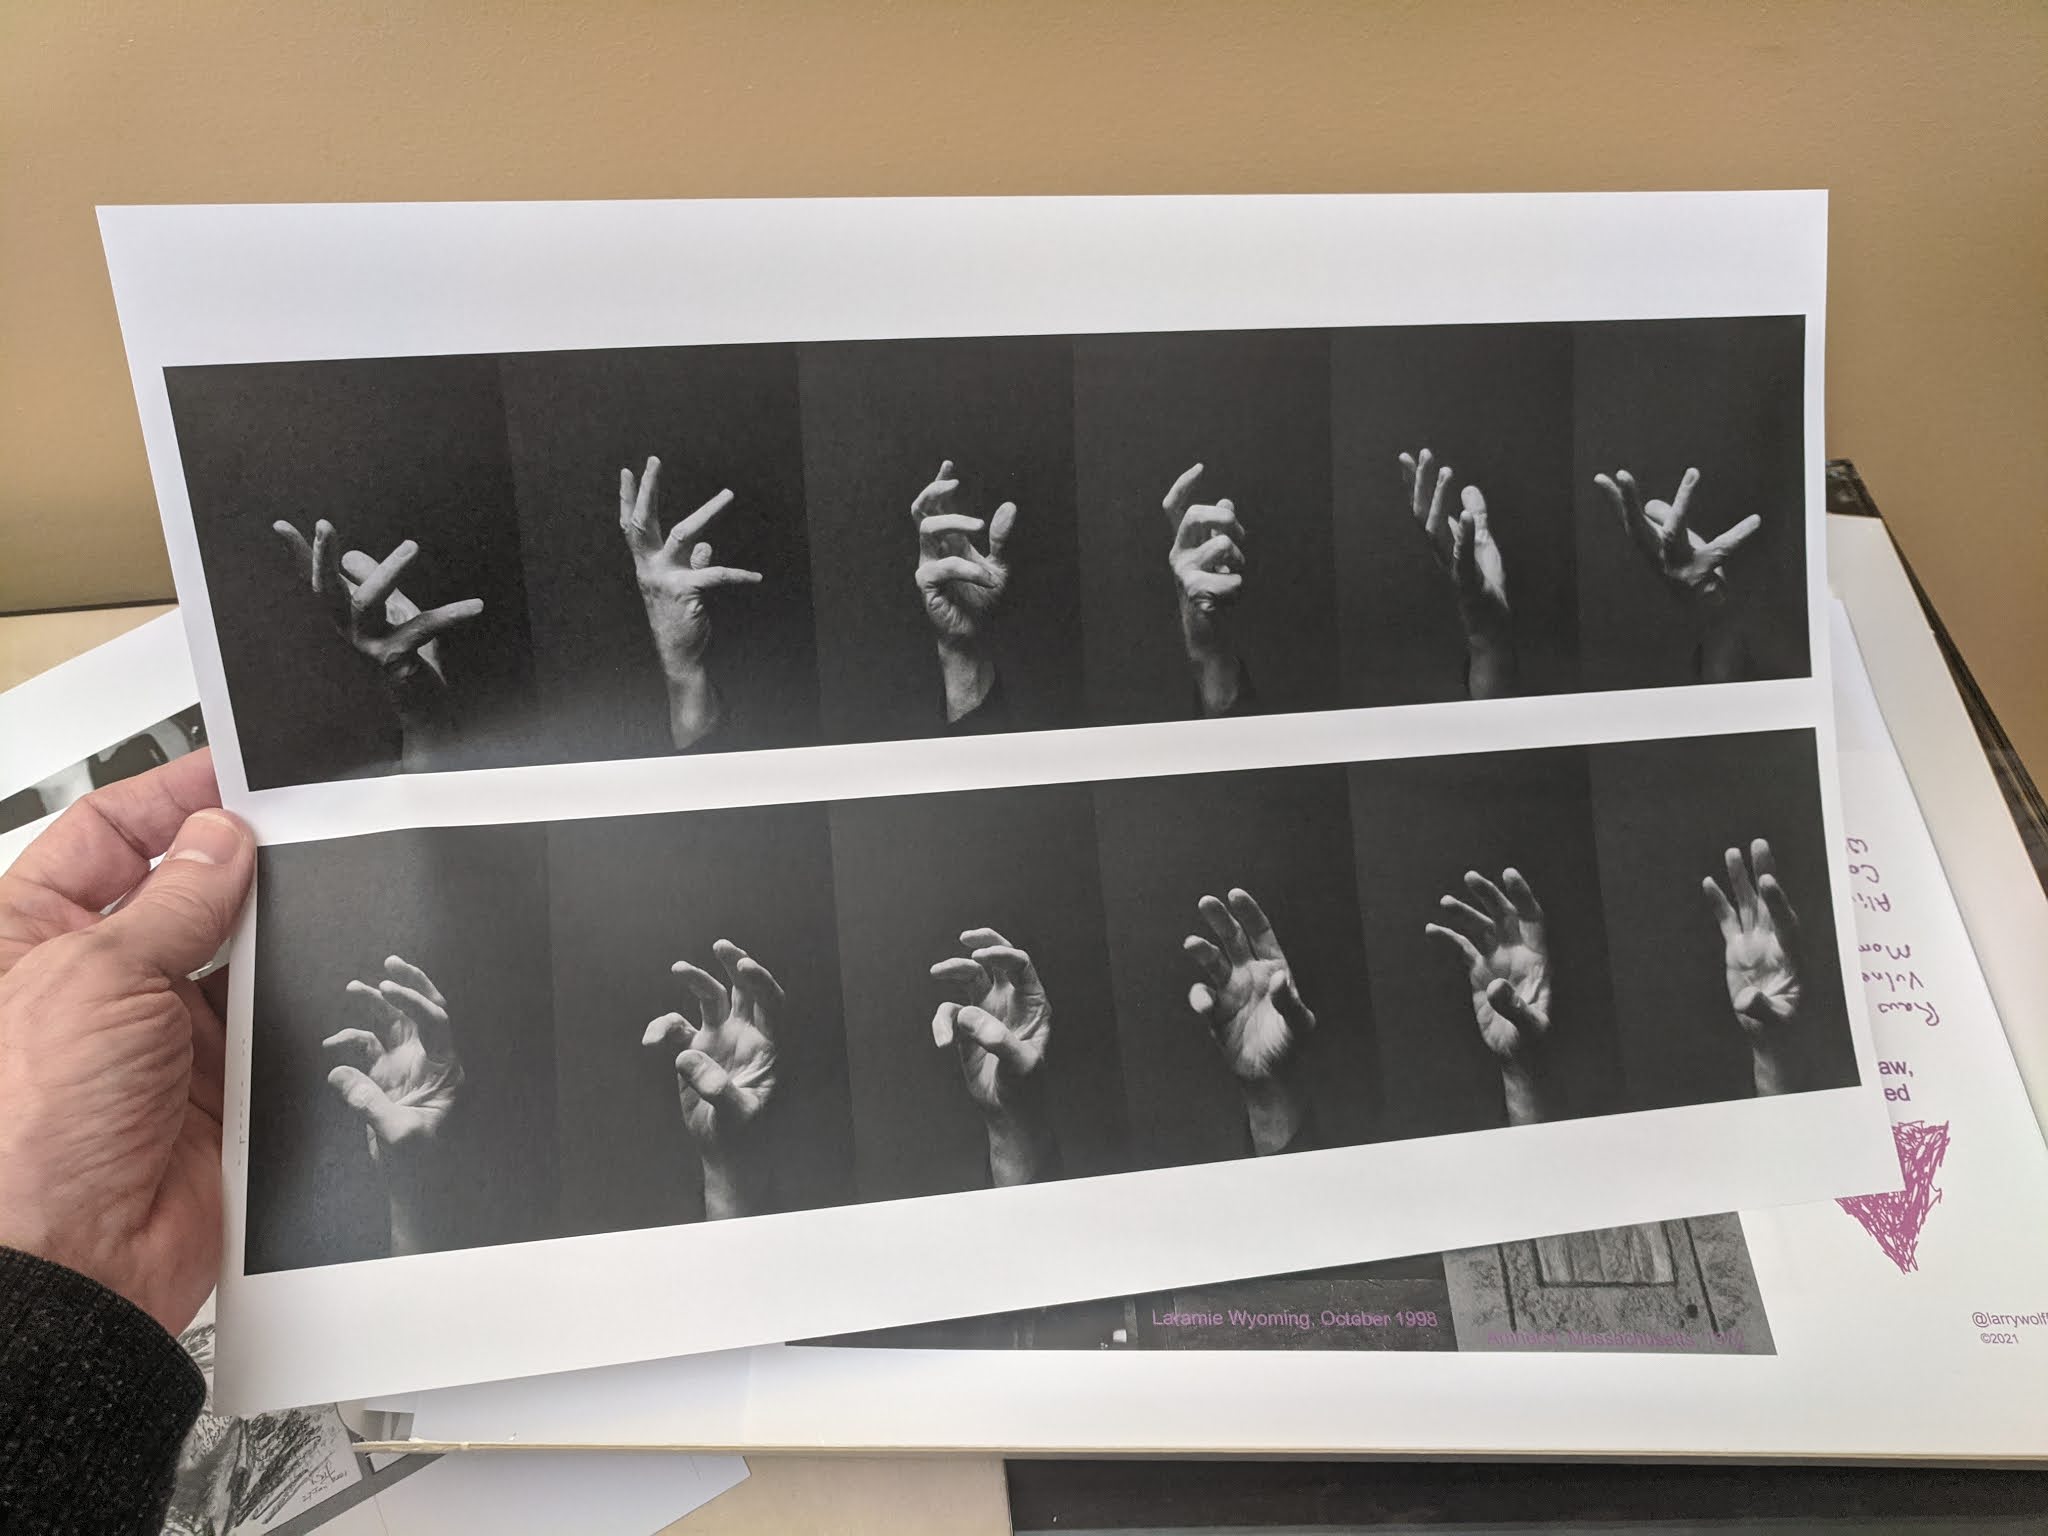 A print with multiple images of a hand against a black background. The hand appears to be changing position across successive images.